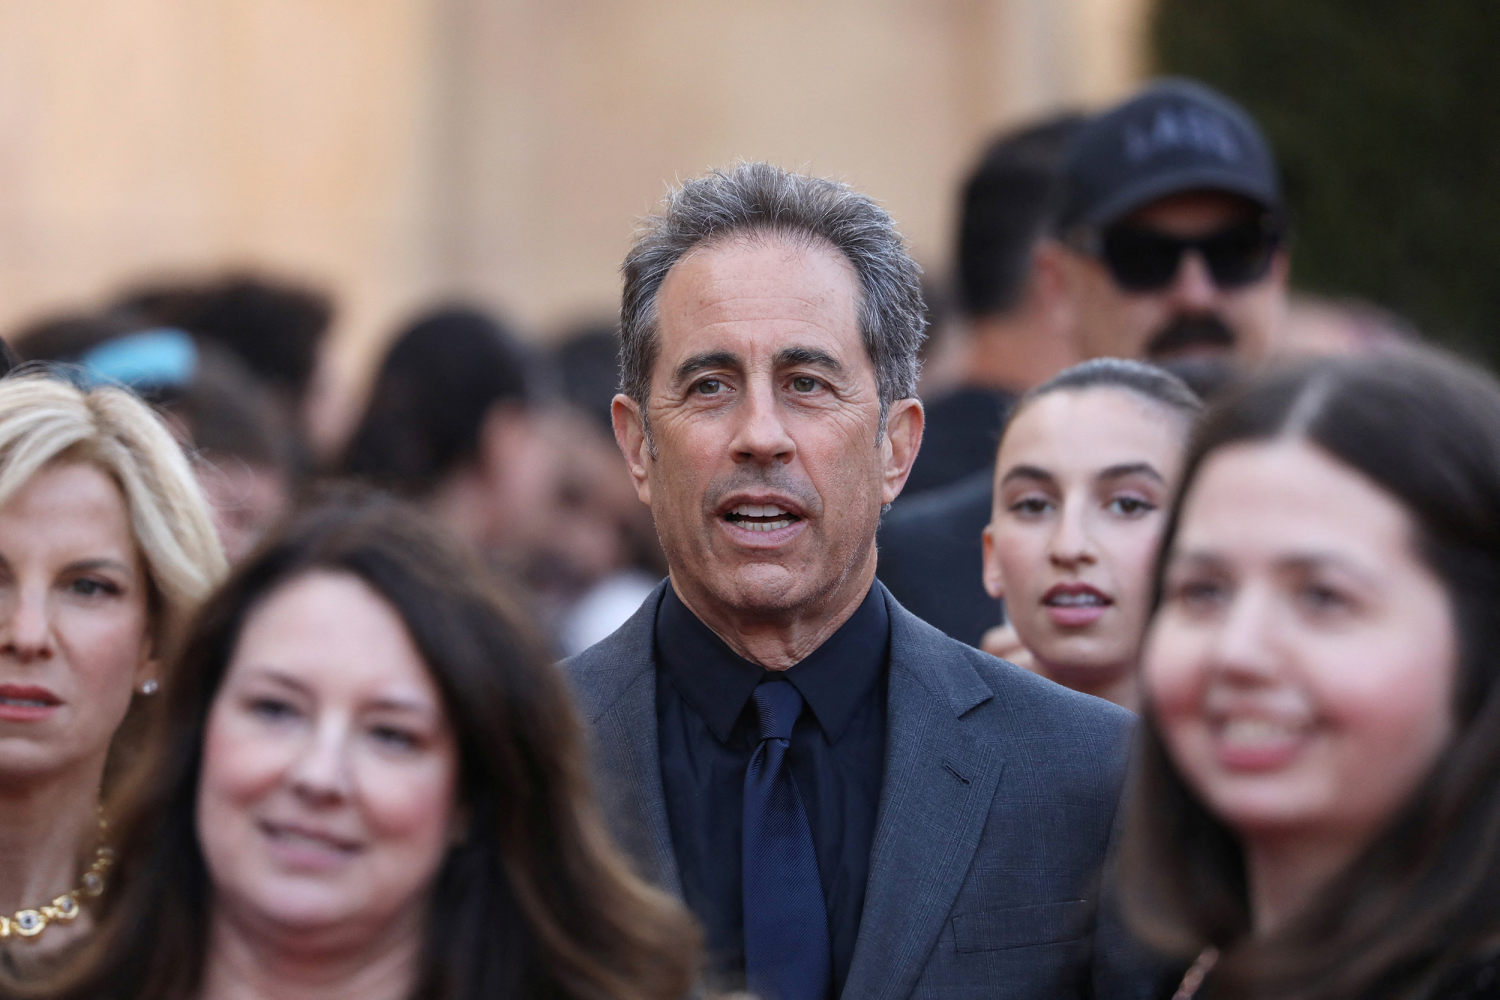 Duke students walk out of Jerry Seinfeld's commencement speech amid wave of anti-war protests